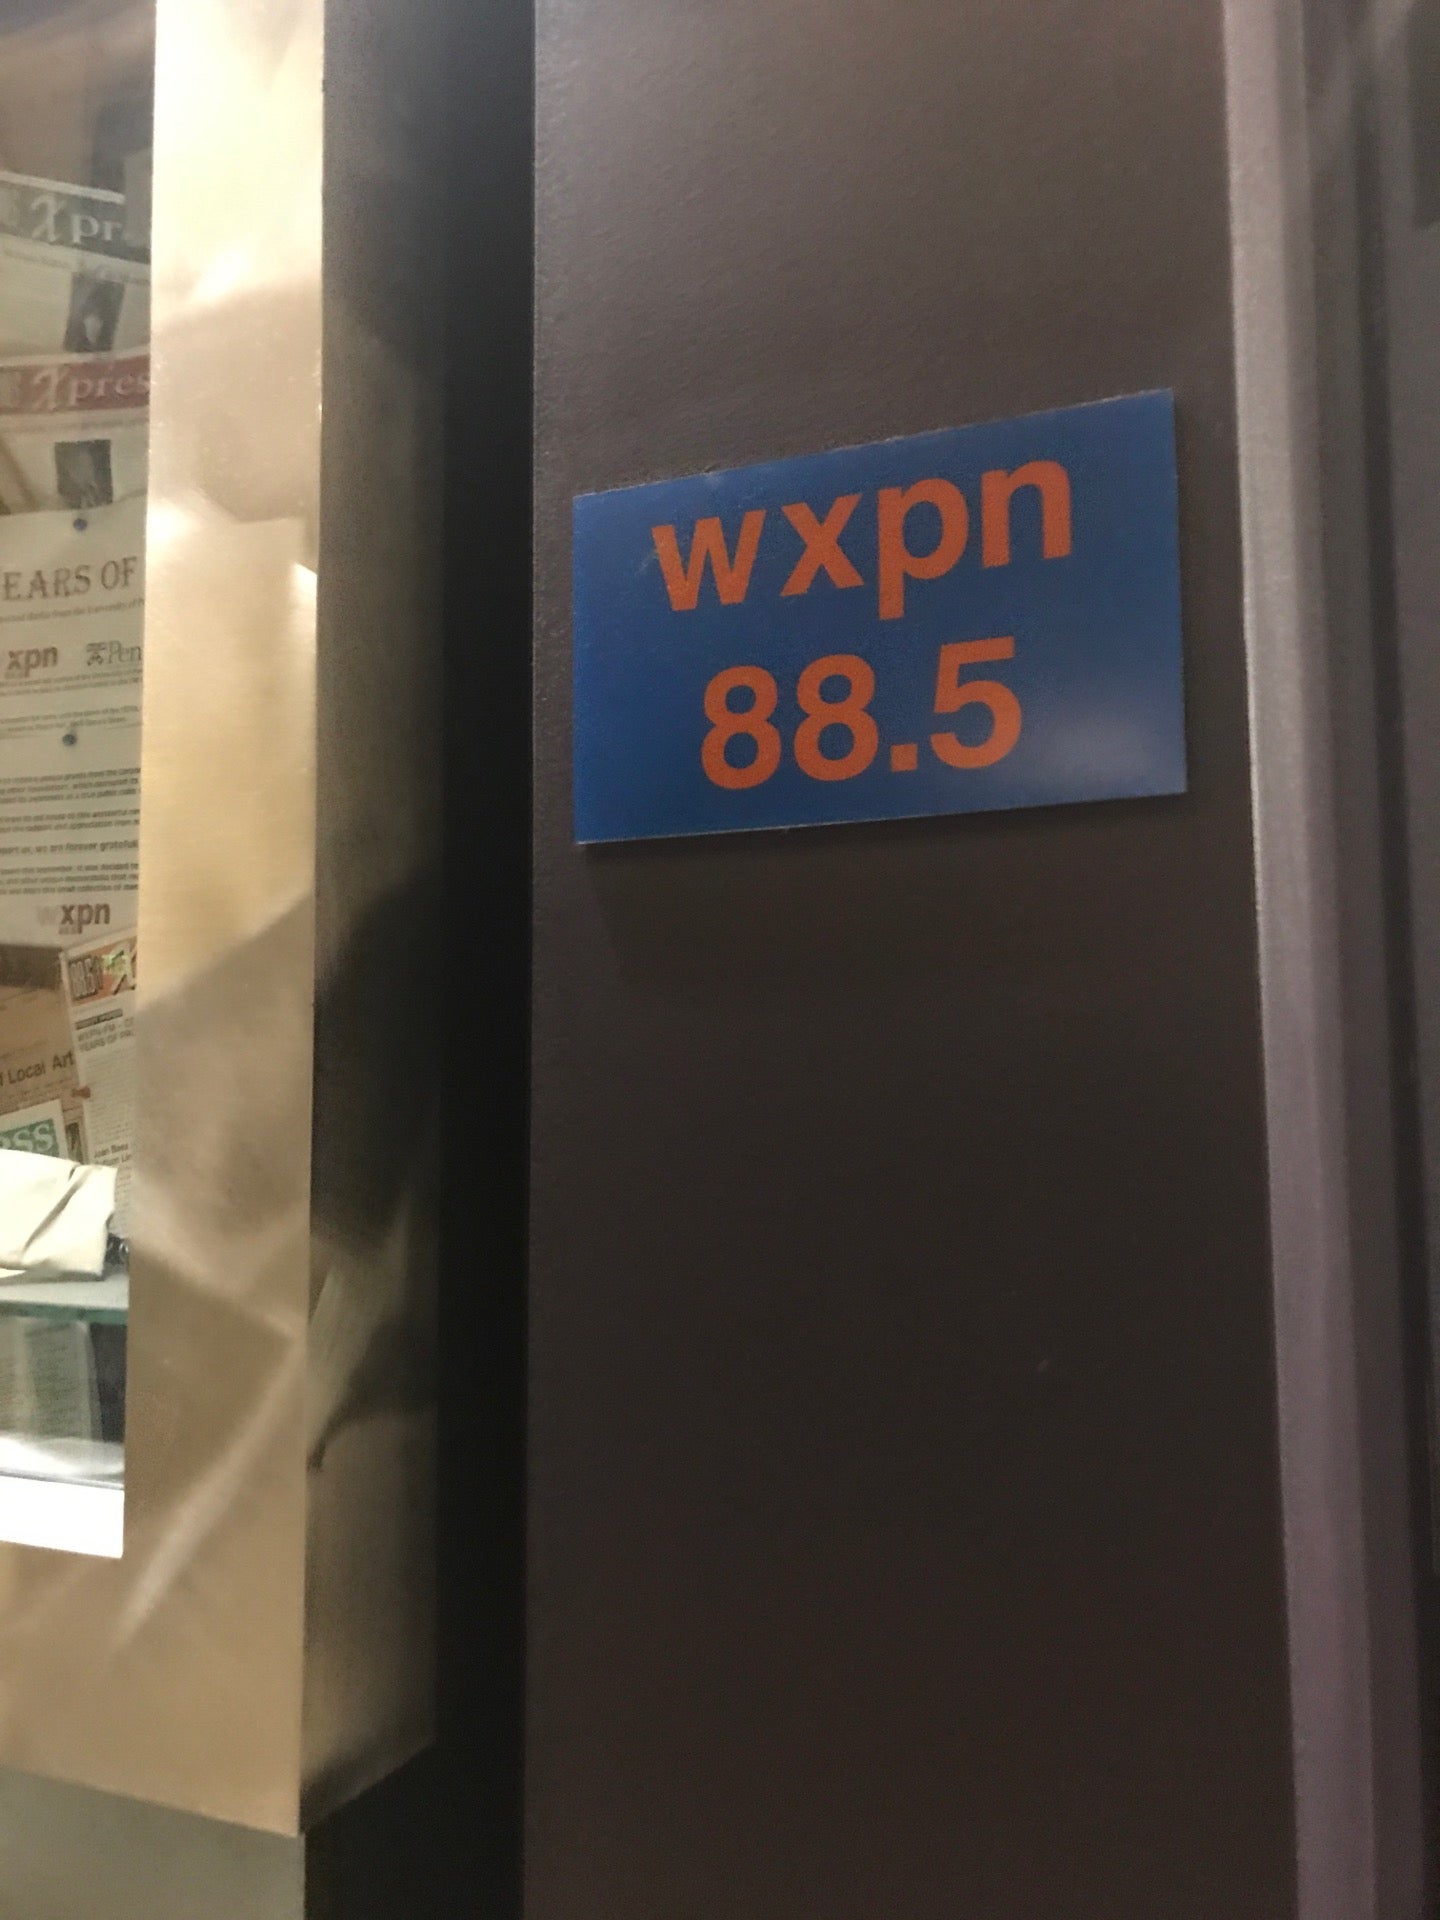 Funky Friday - WXPN